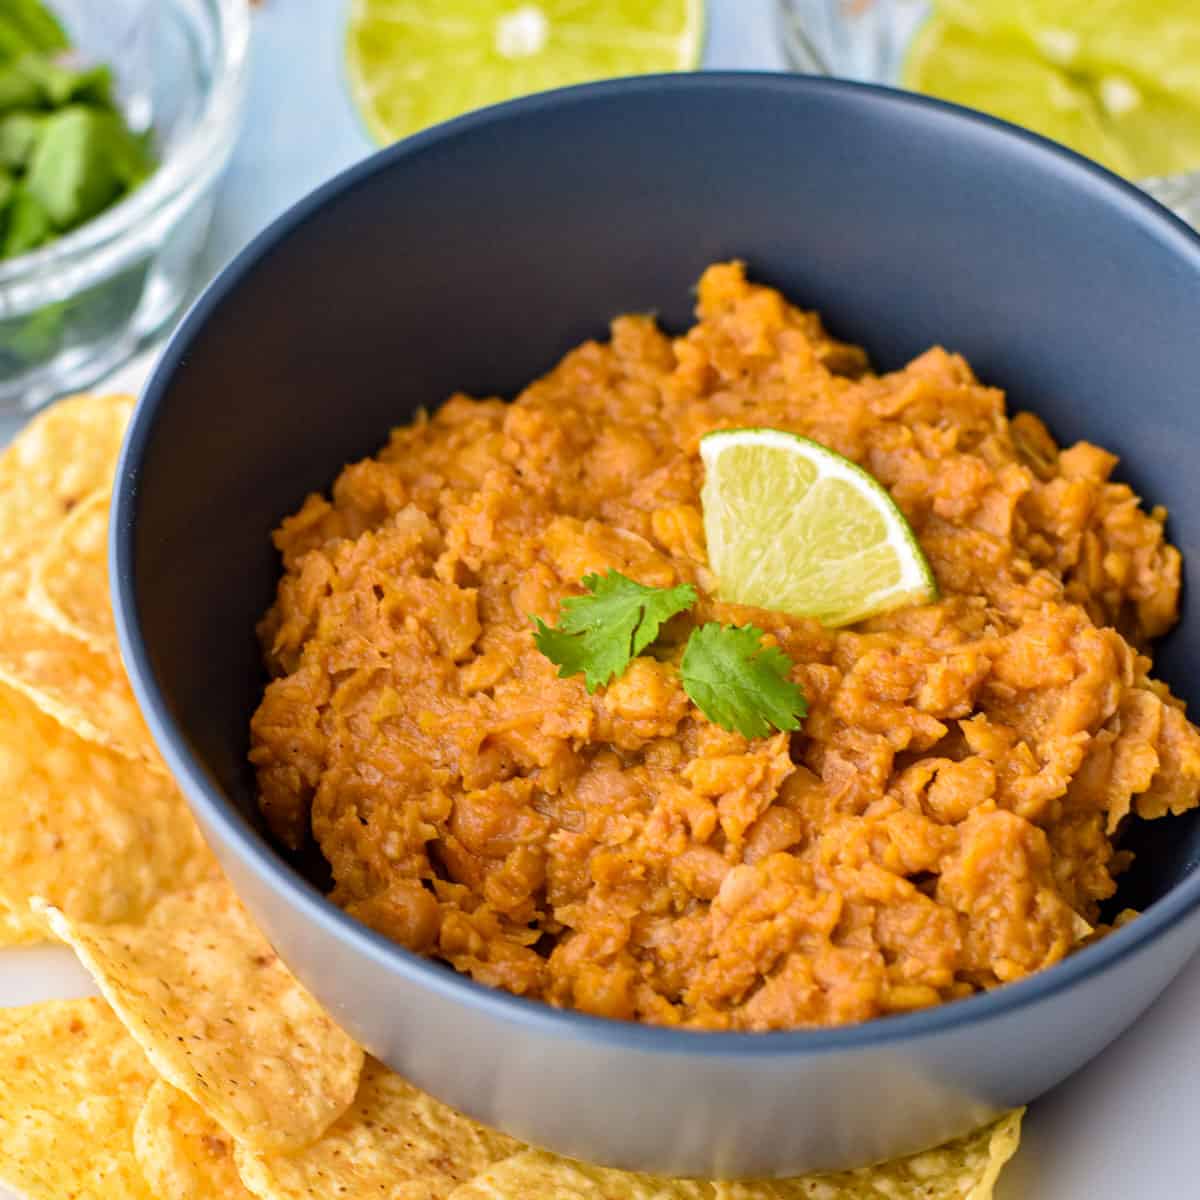 refried beans in a navy blue bowl on a plate with tortilla chips